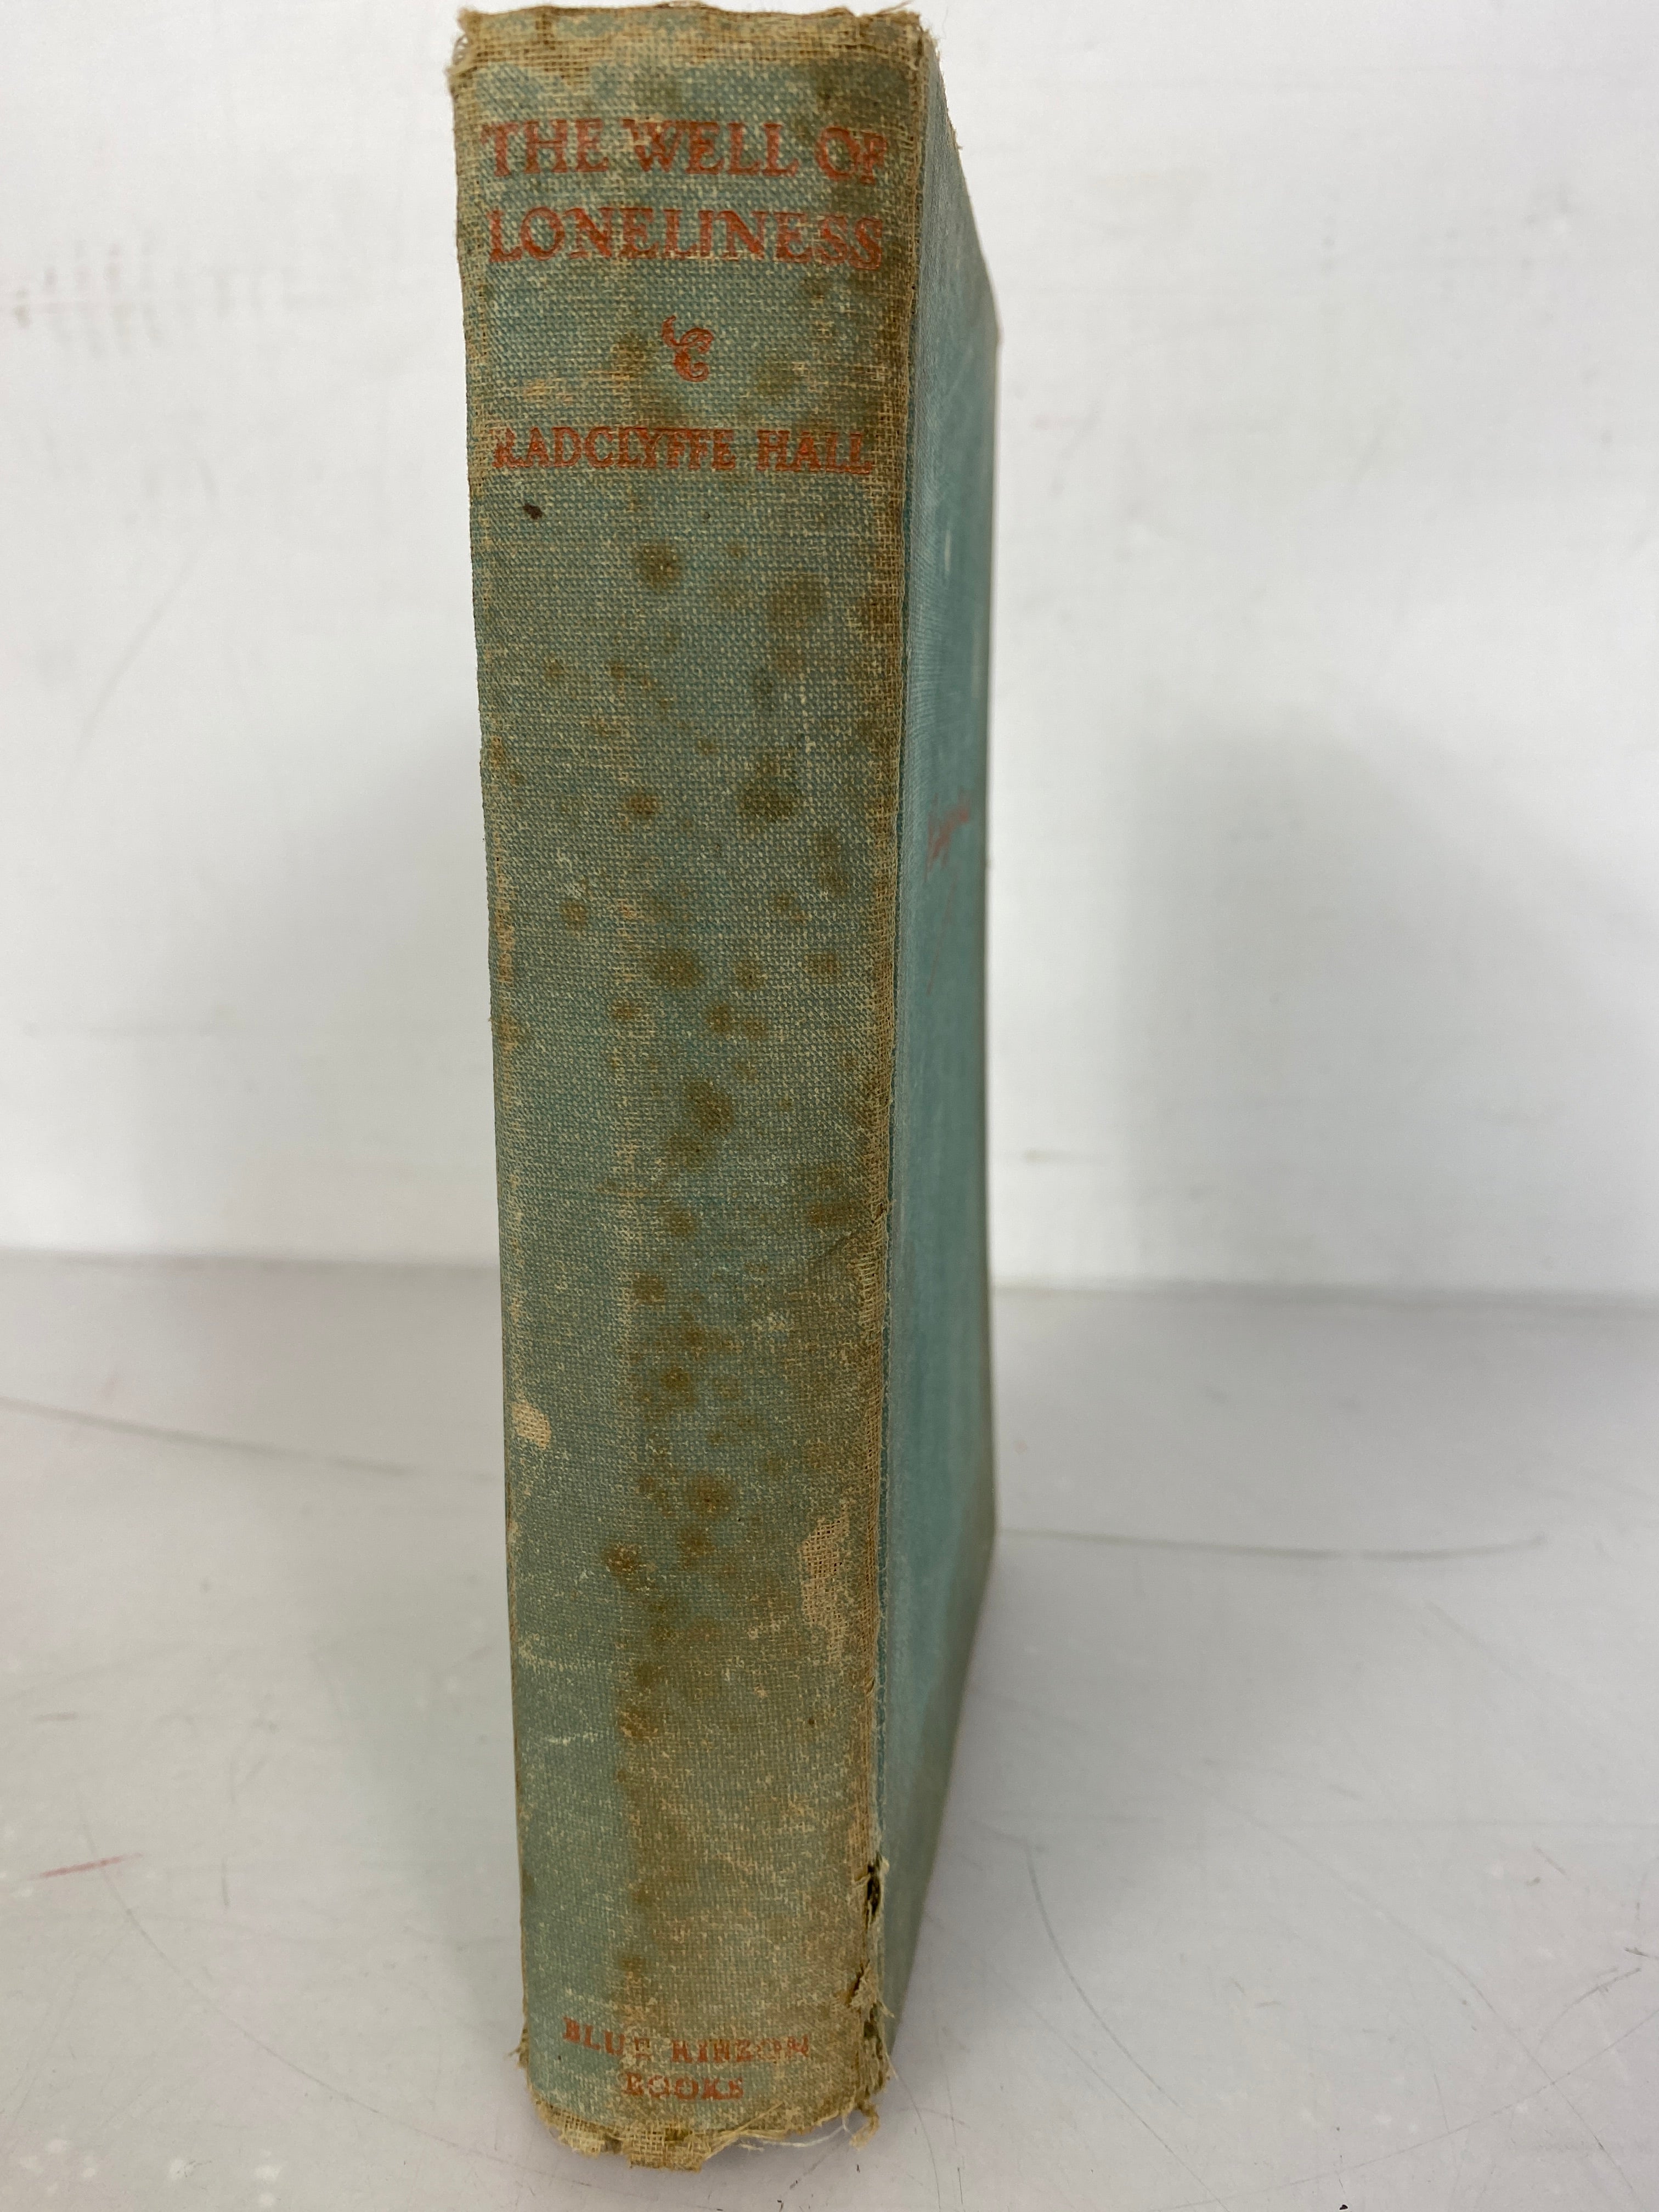 Radclyffe Hall's The Well of Loneliness 1937 Twenty First Printing HC